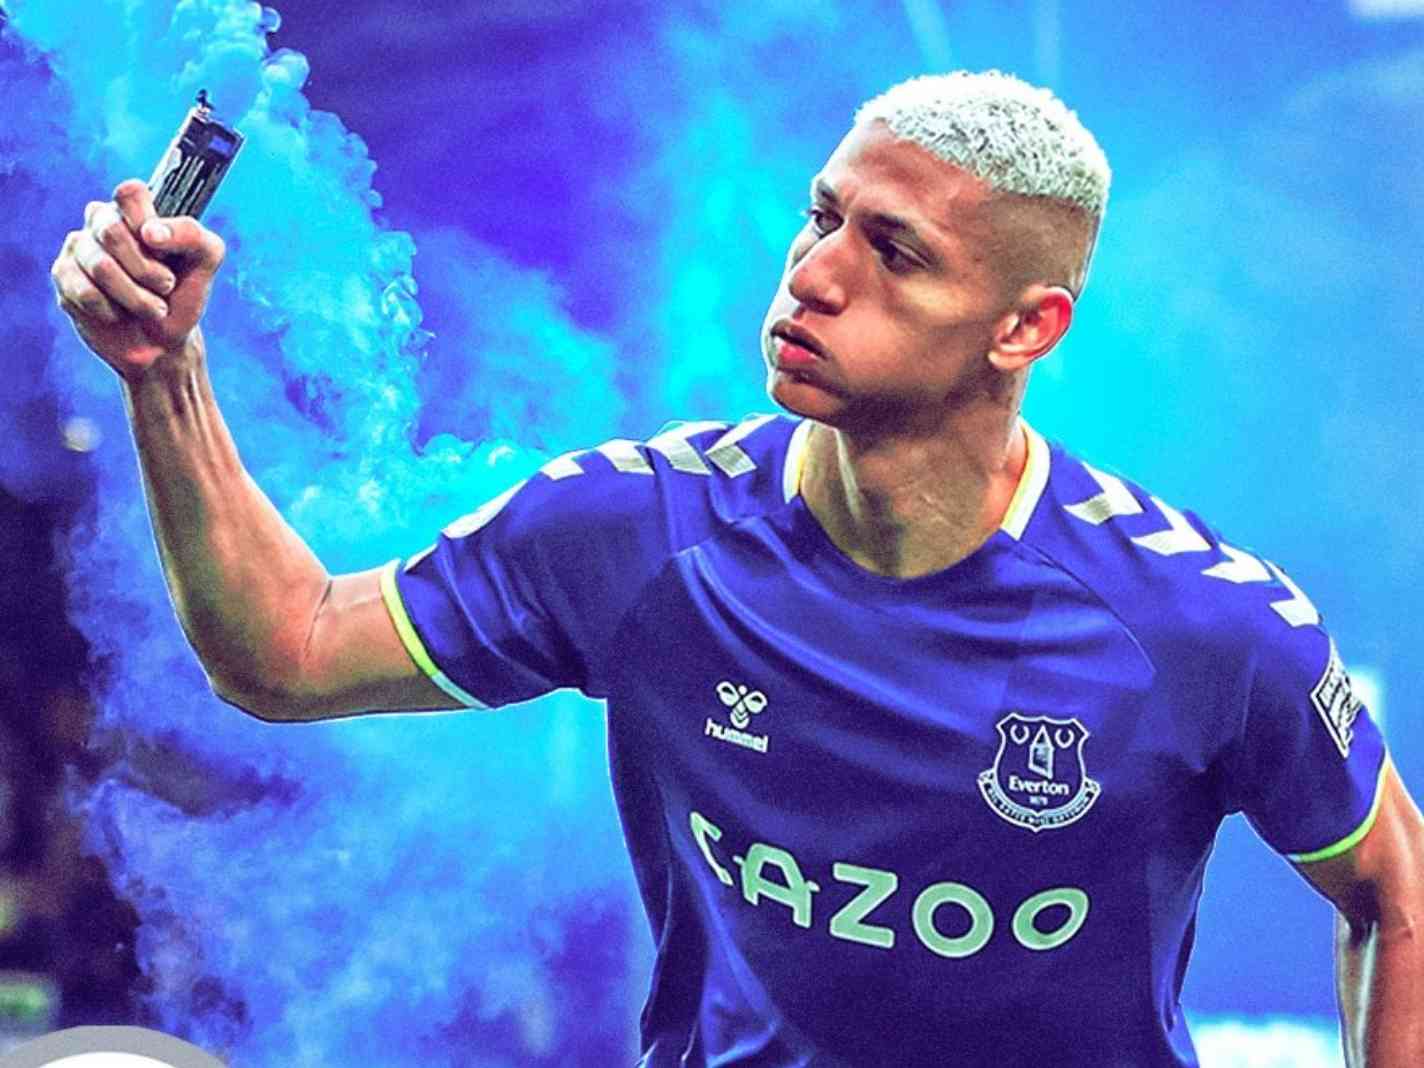 Richarlison flare incident imagined as FIFA 23 cover and it slaps